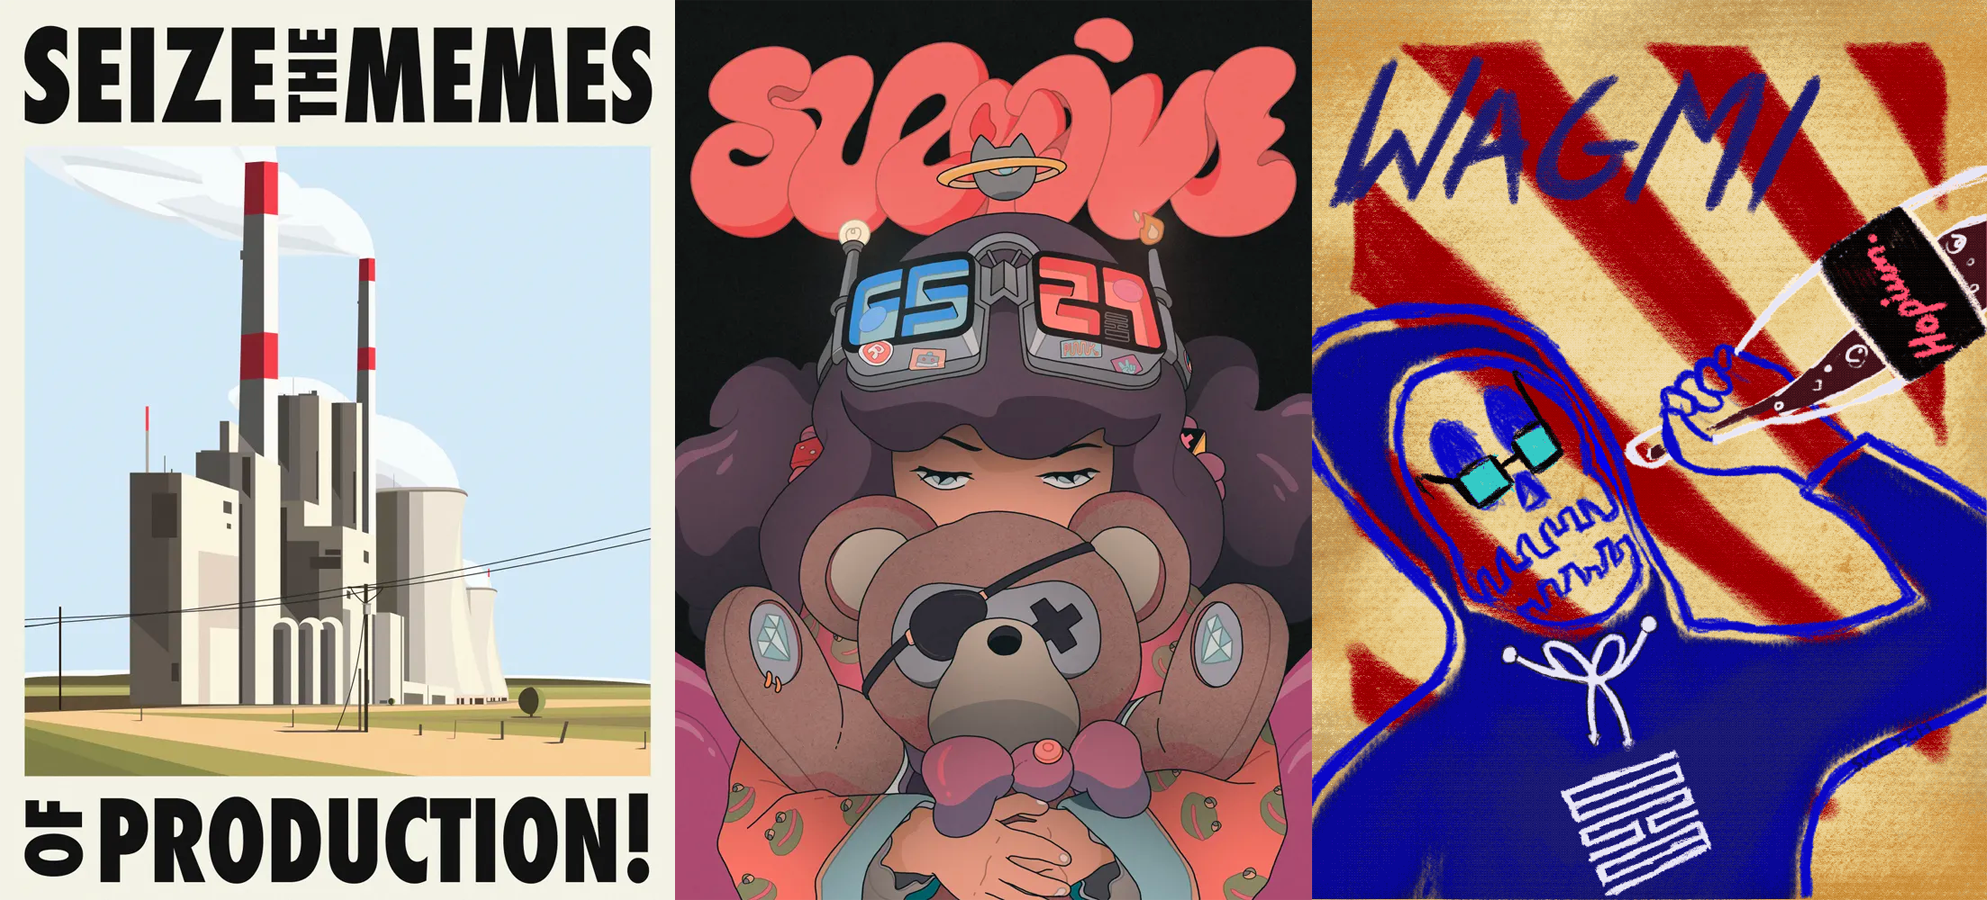 MEME FACTORY by Grant Riven Yun, Bear Survival Tactics by DirtyRobot, and rekt6529 by OSF (from left to right)